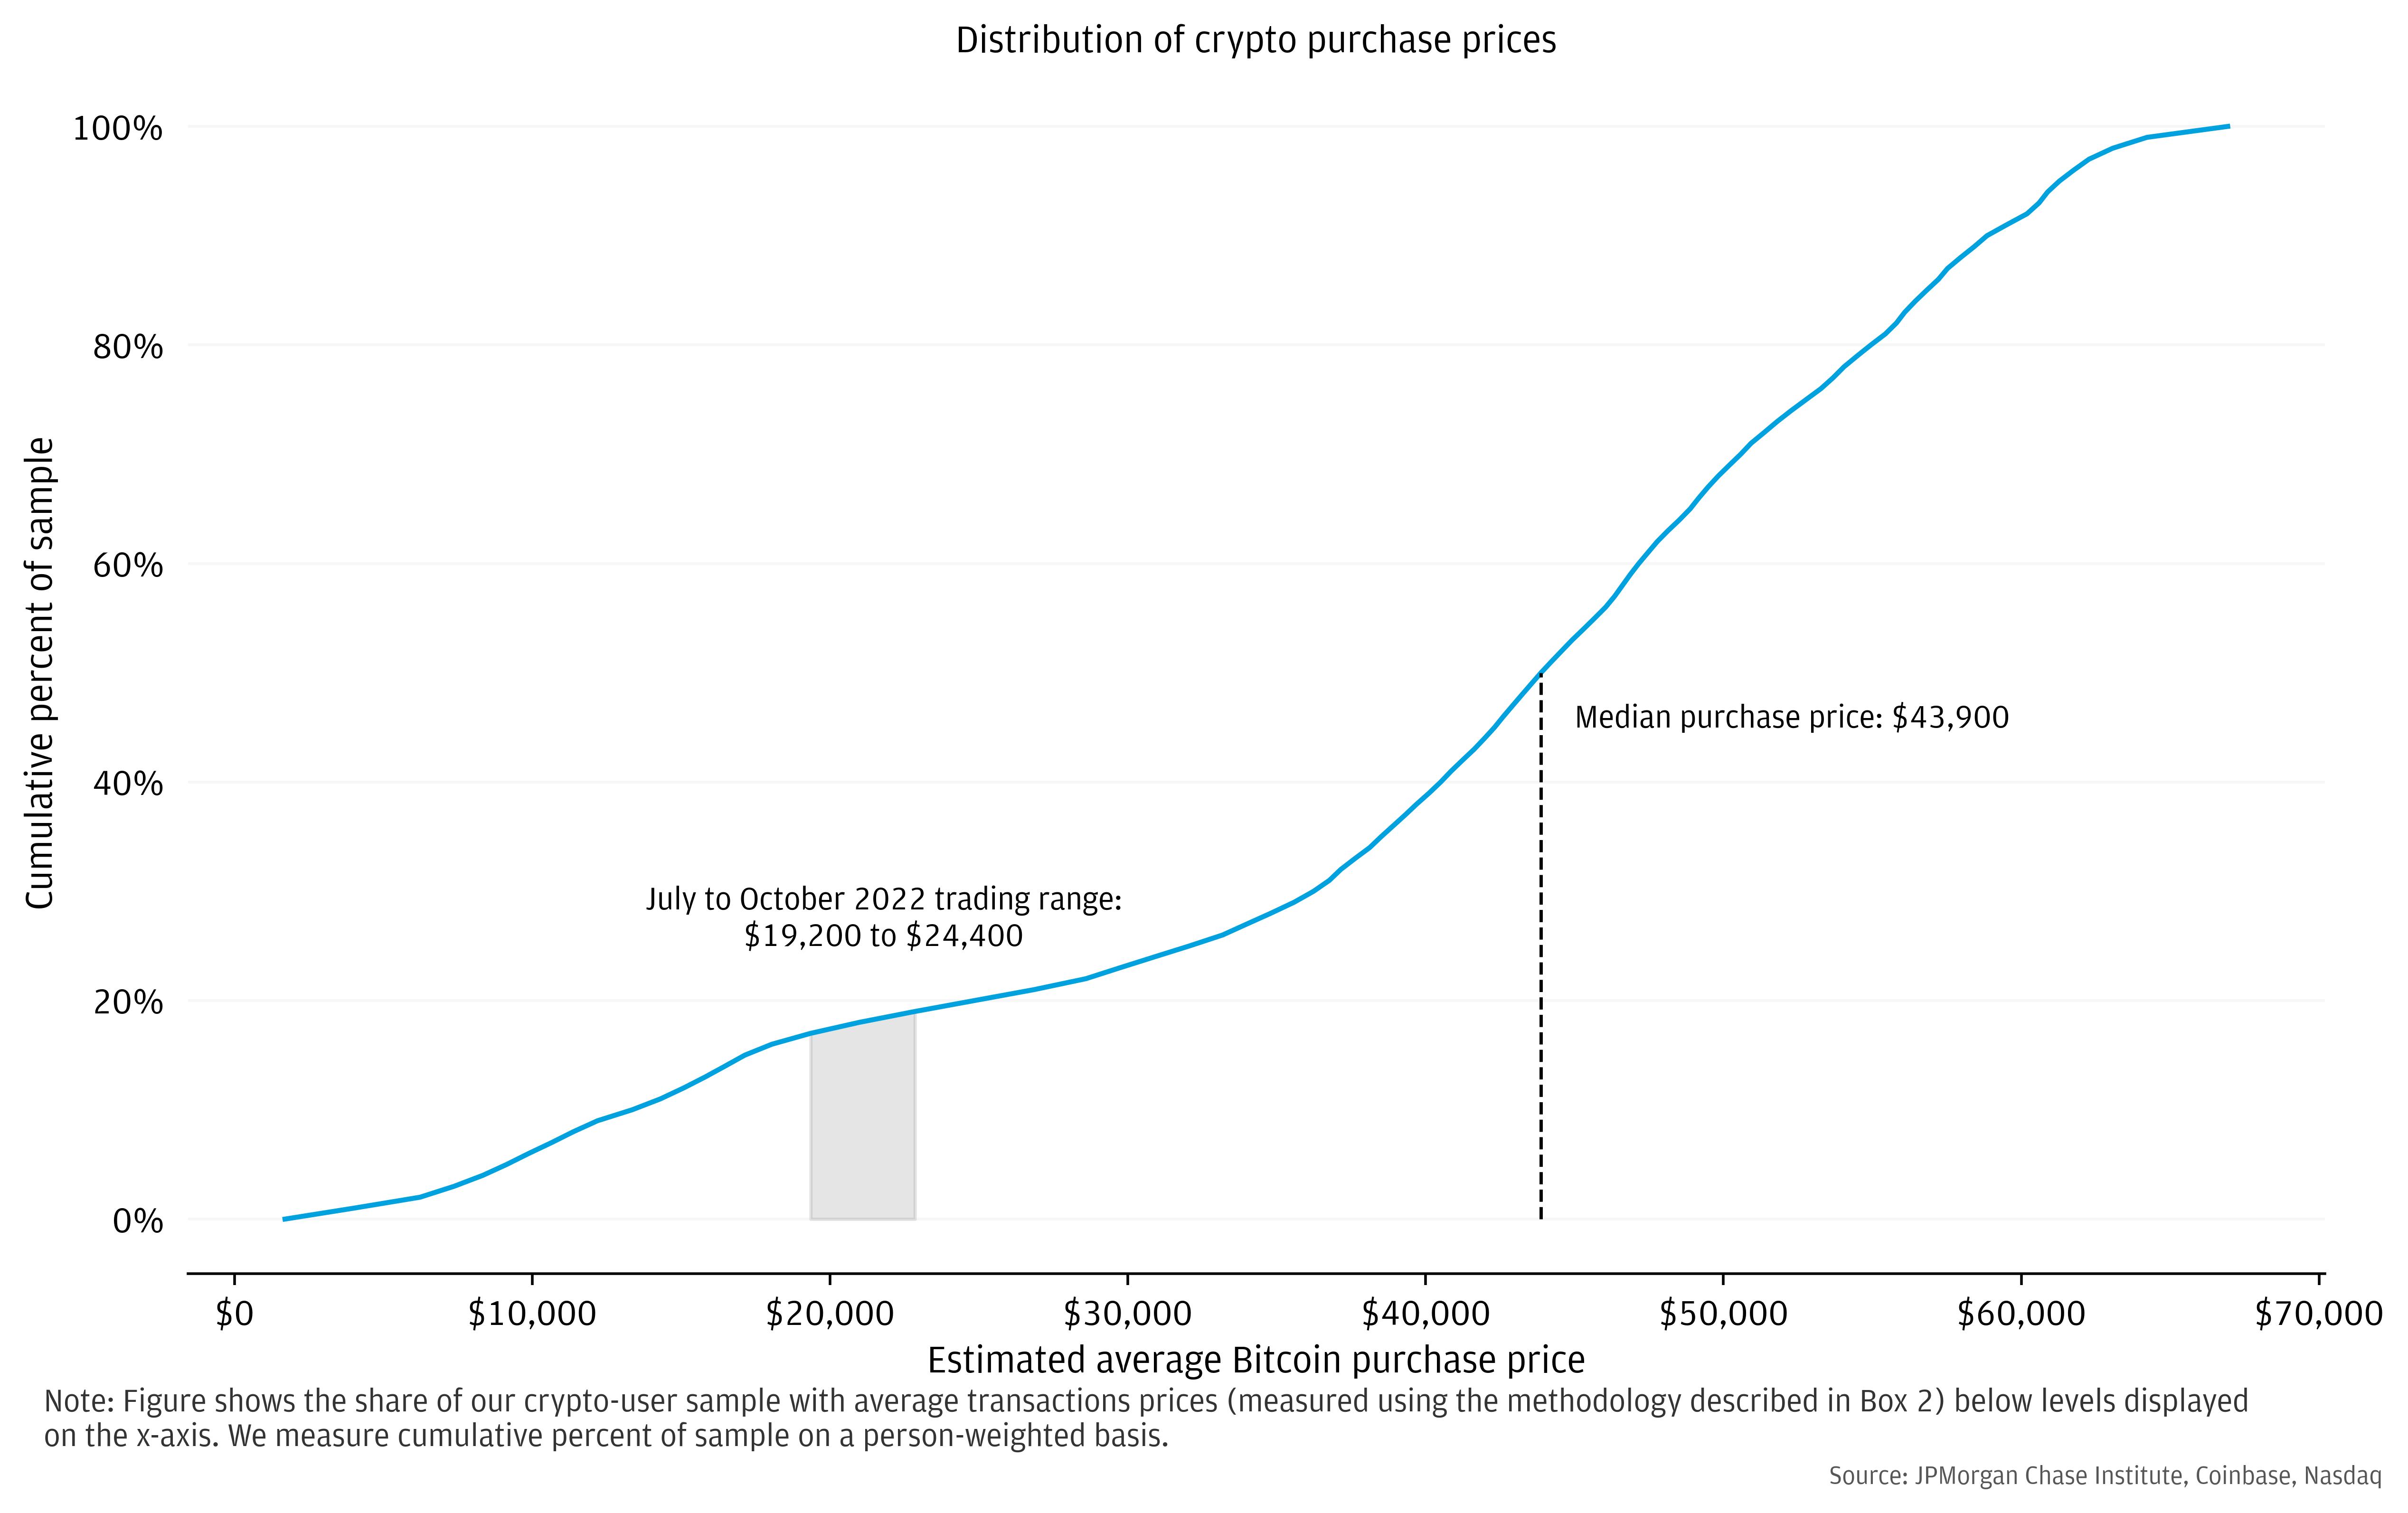 The majority of U.S. crypto users made transfers to crypto accounts when prices were at substantially elevated values relative to current market levels.